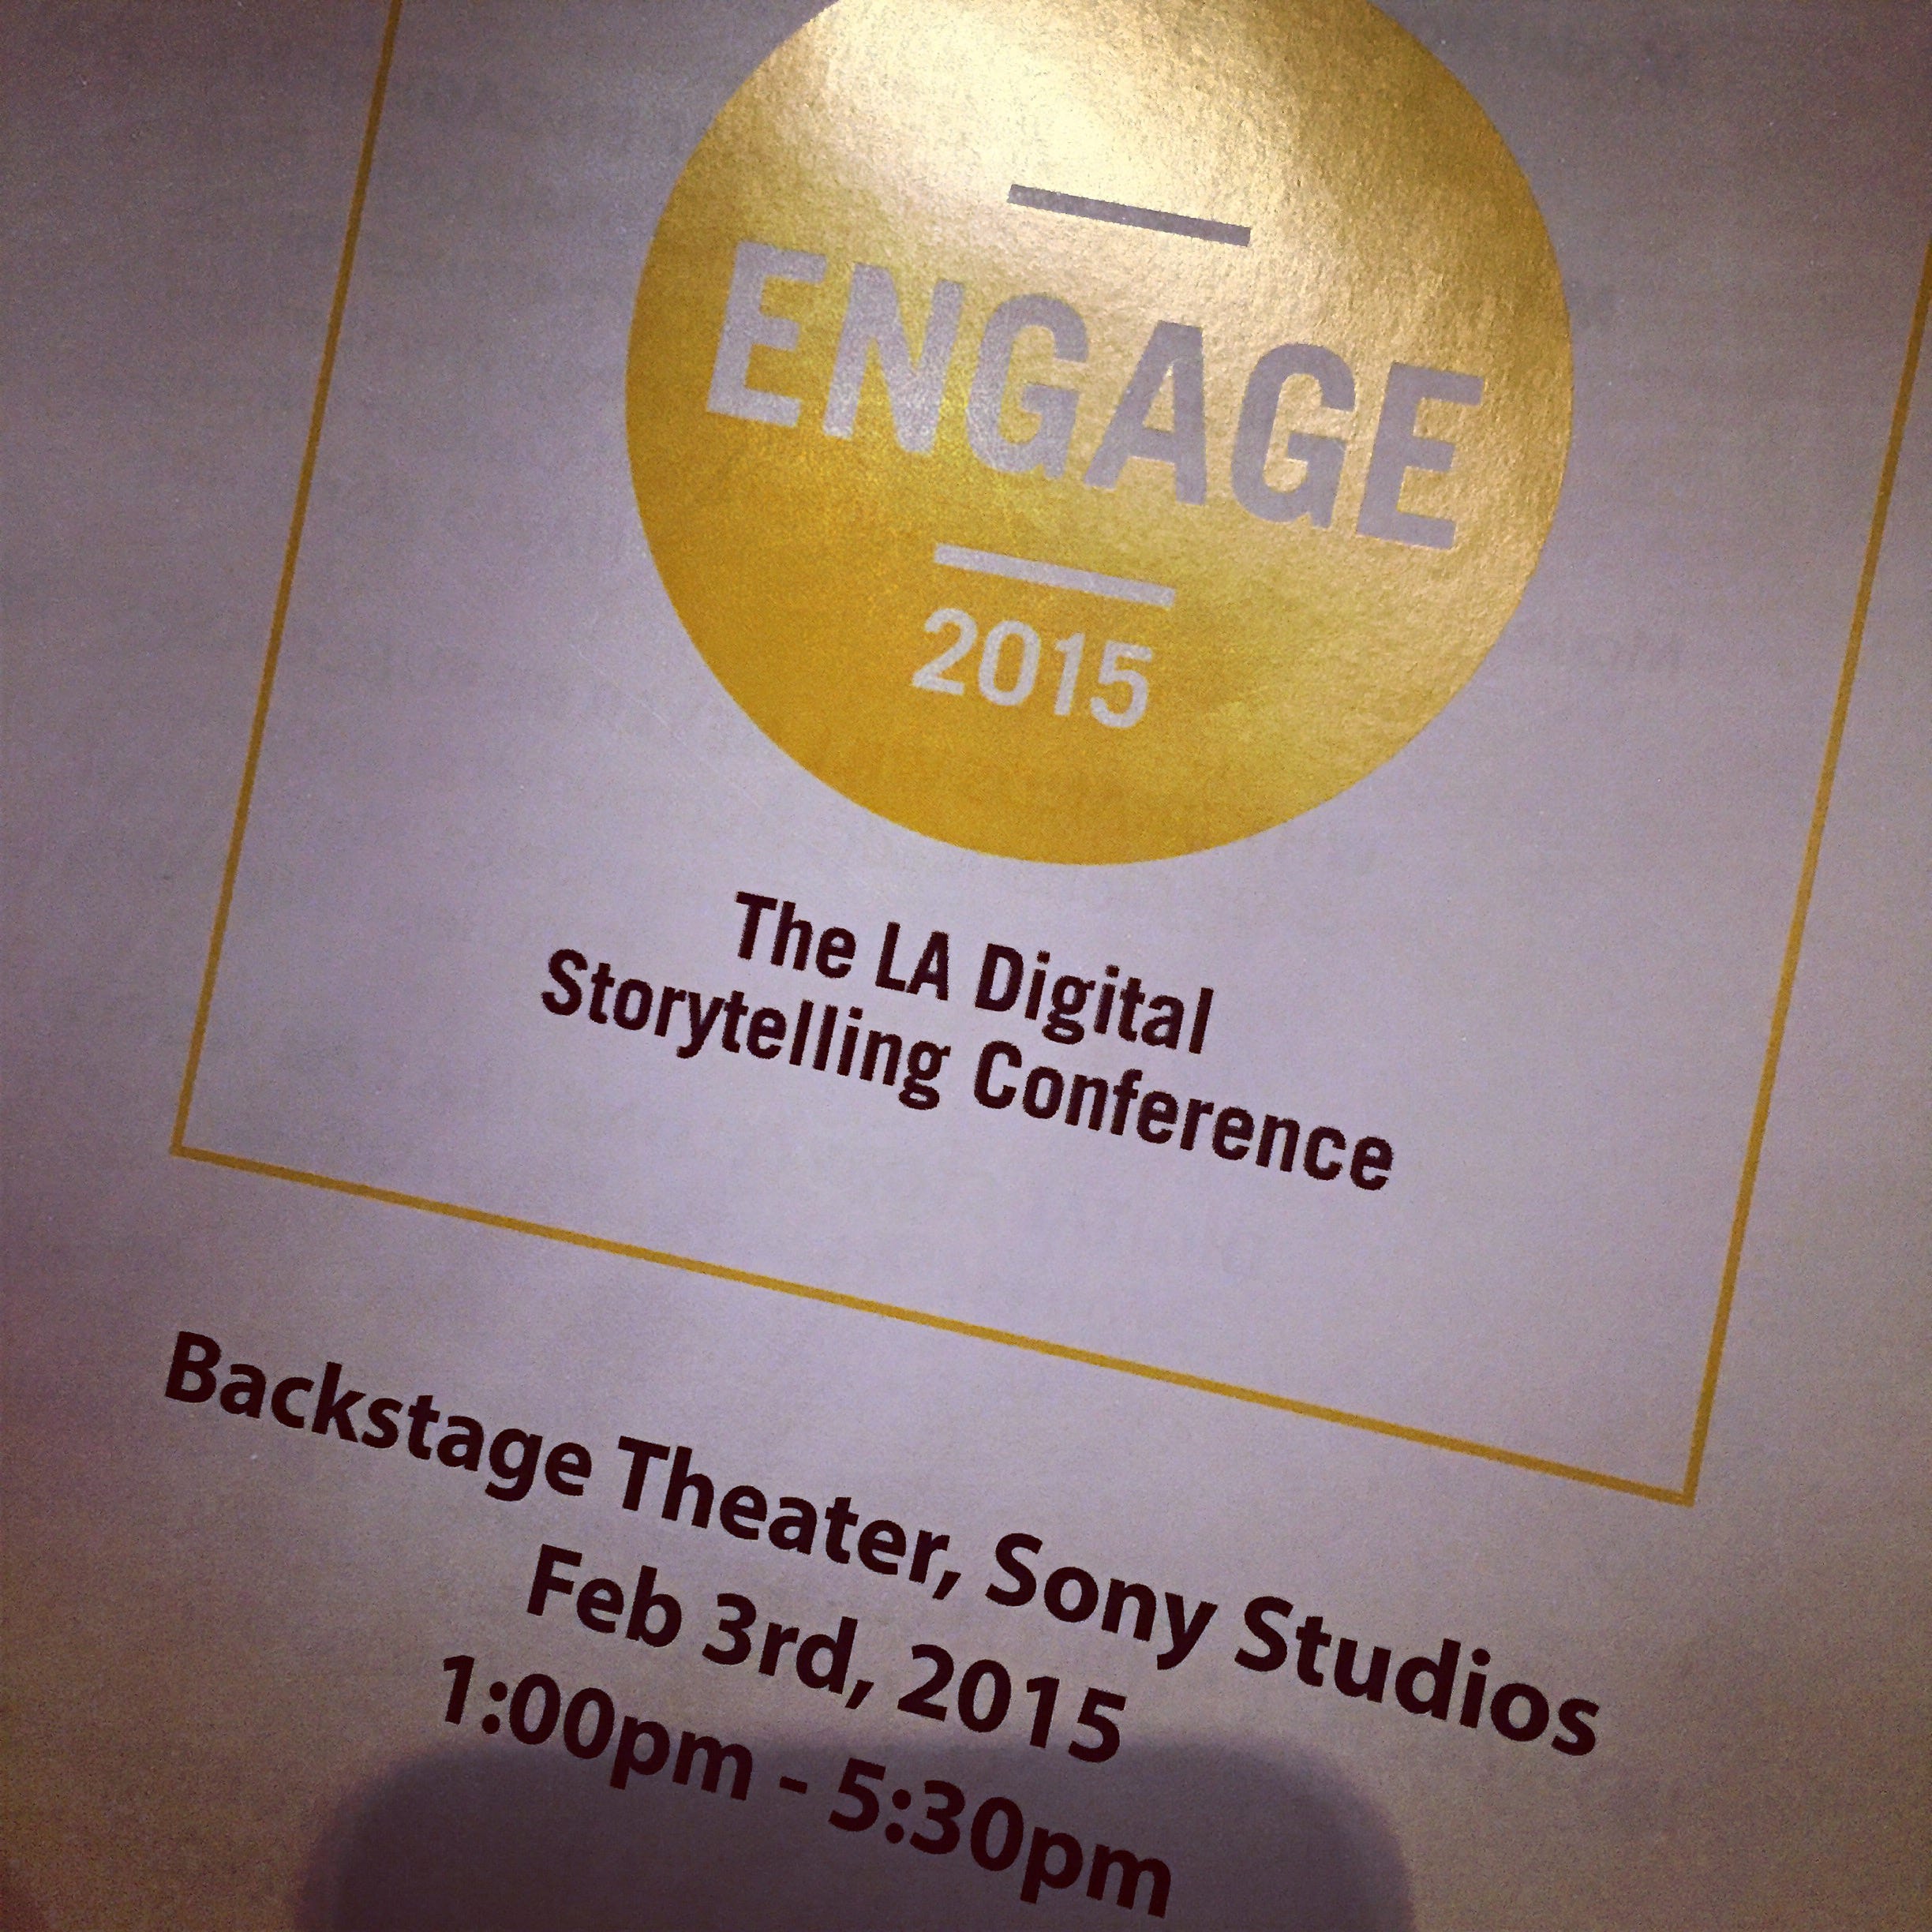 ENGAGE The LA Digital Storytelling Conference (Recap) by Drew Lewis